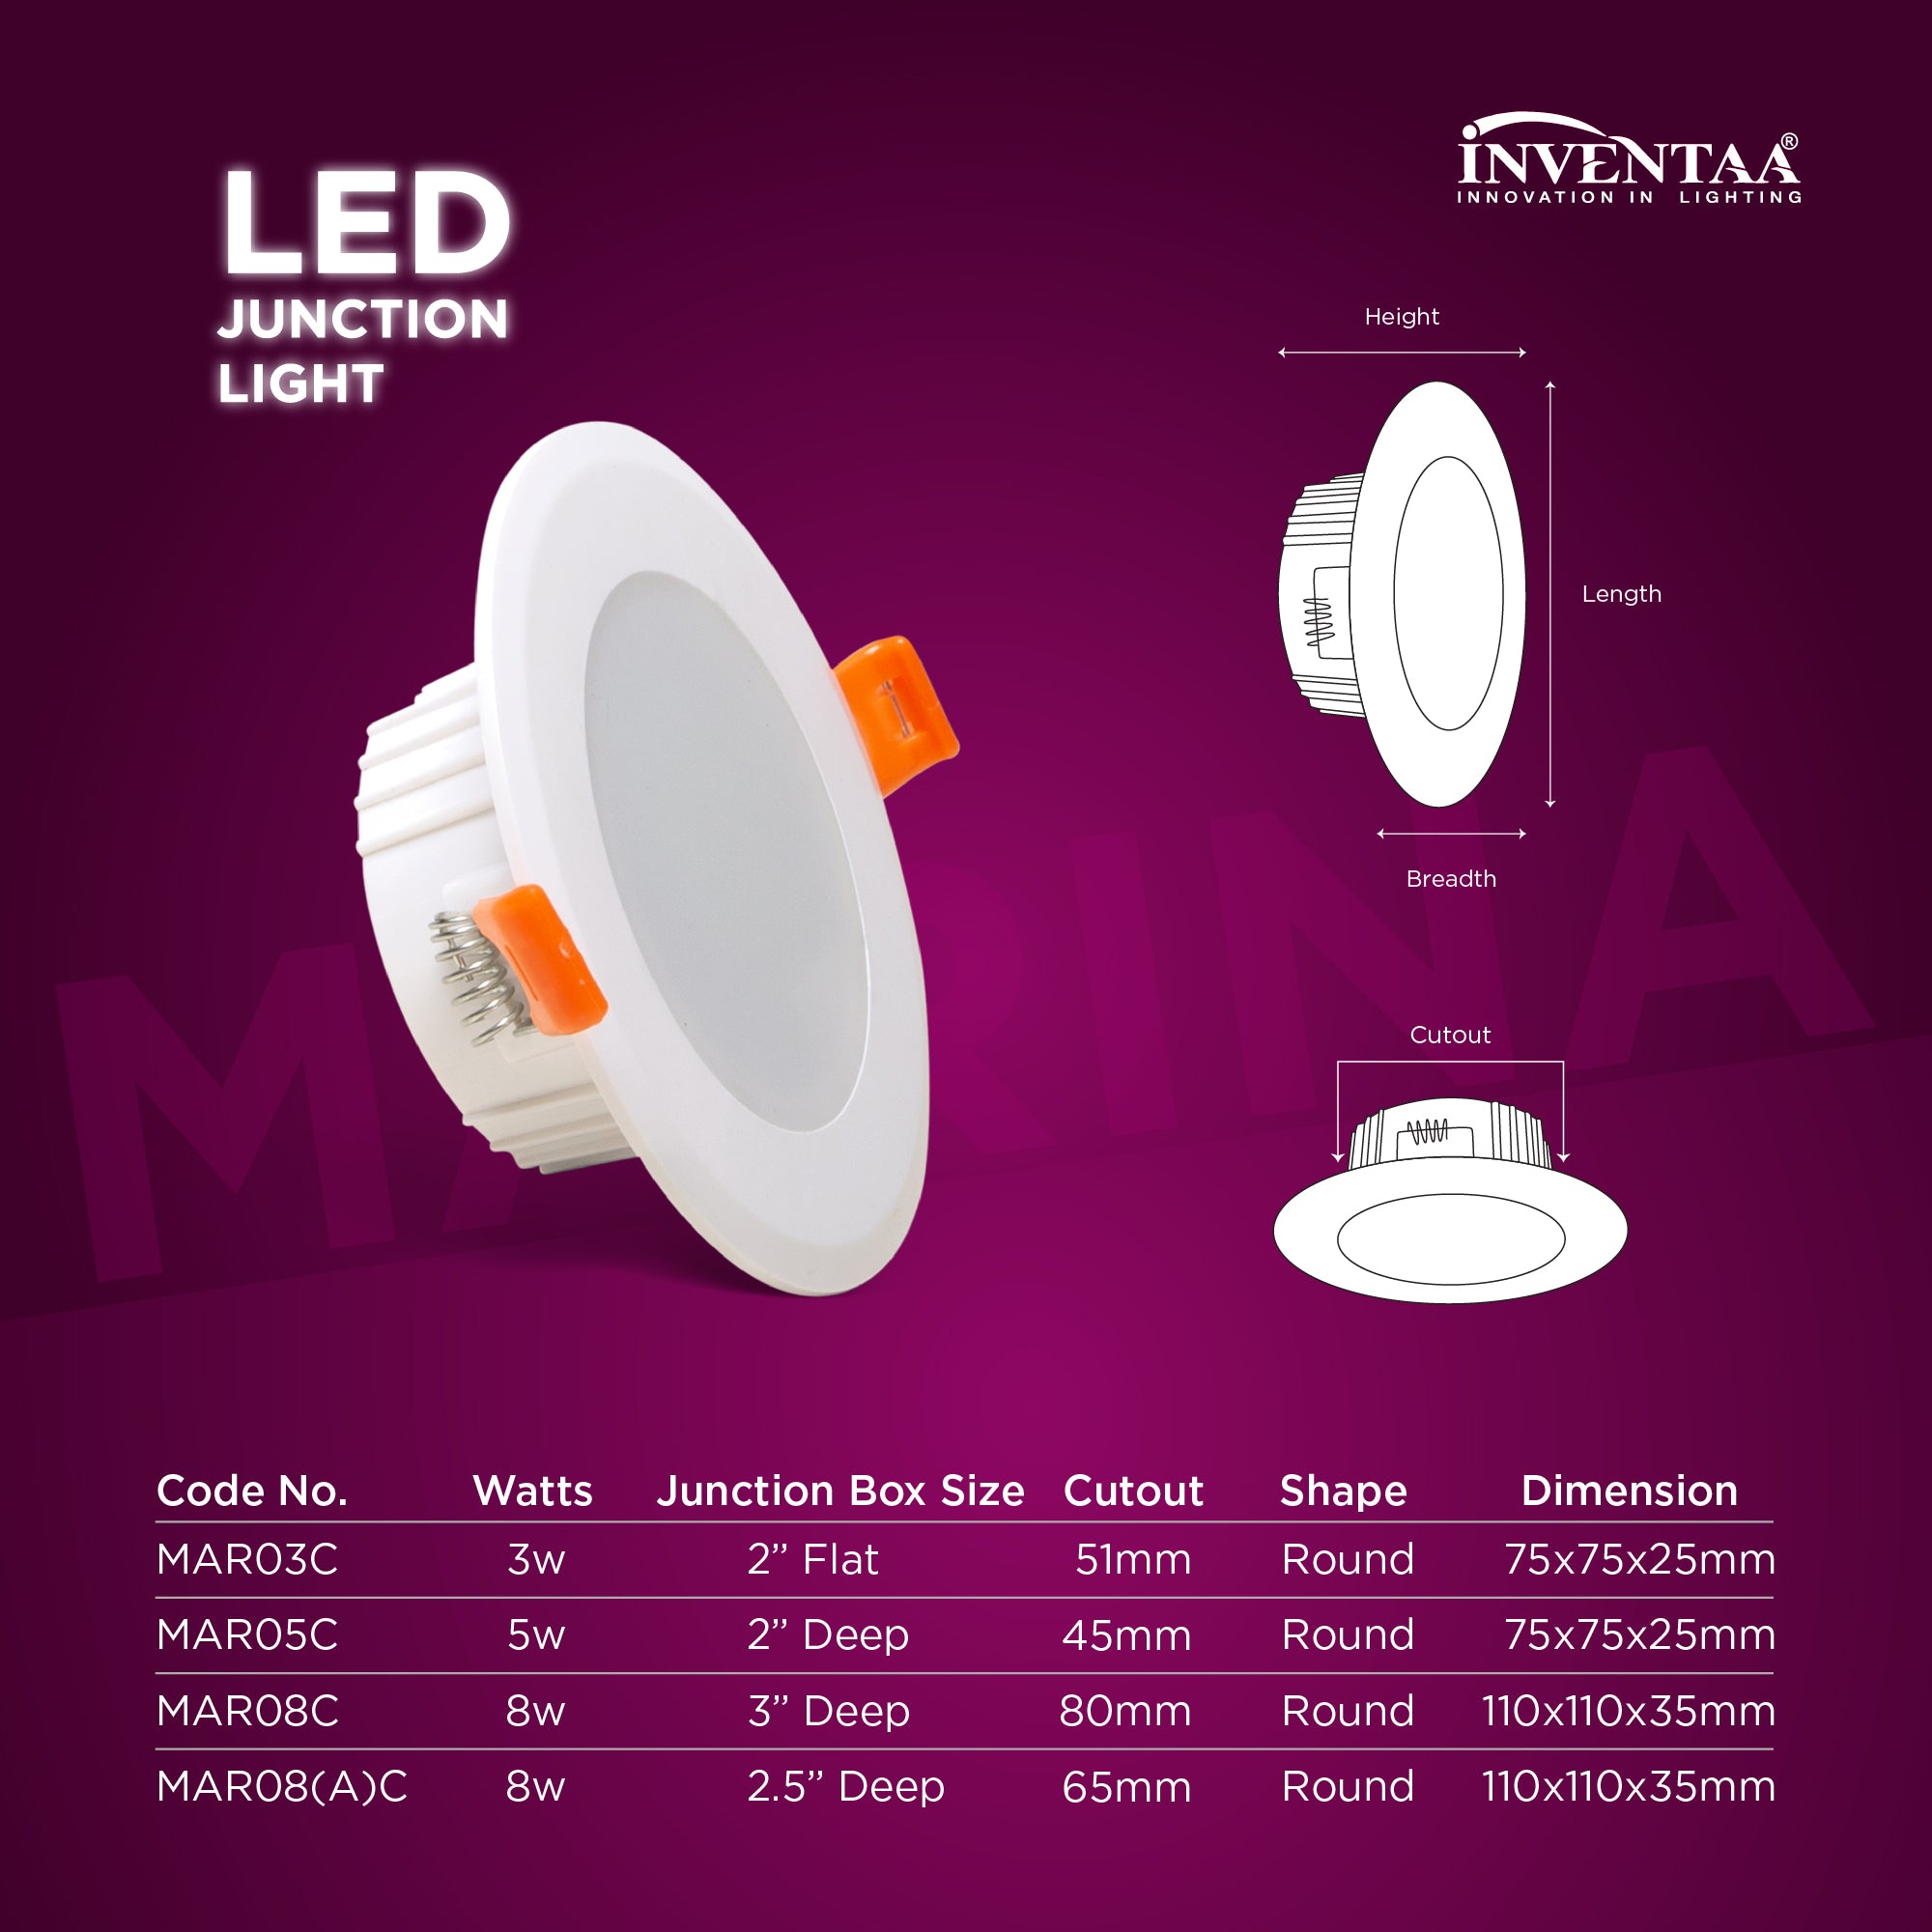 Dimension Of Marina 8W LED Junction Light #Suitable For_3 inch Deep Junction Box